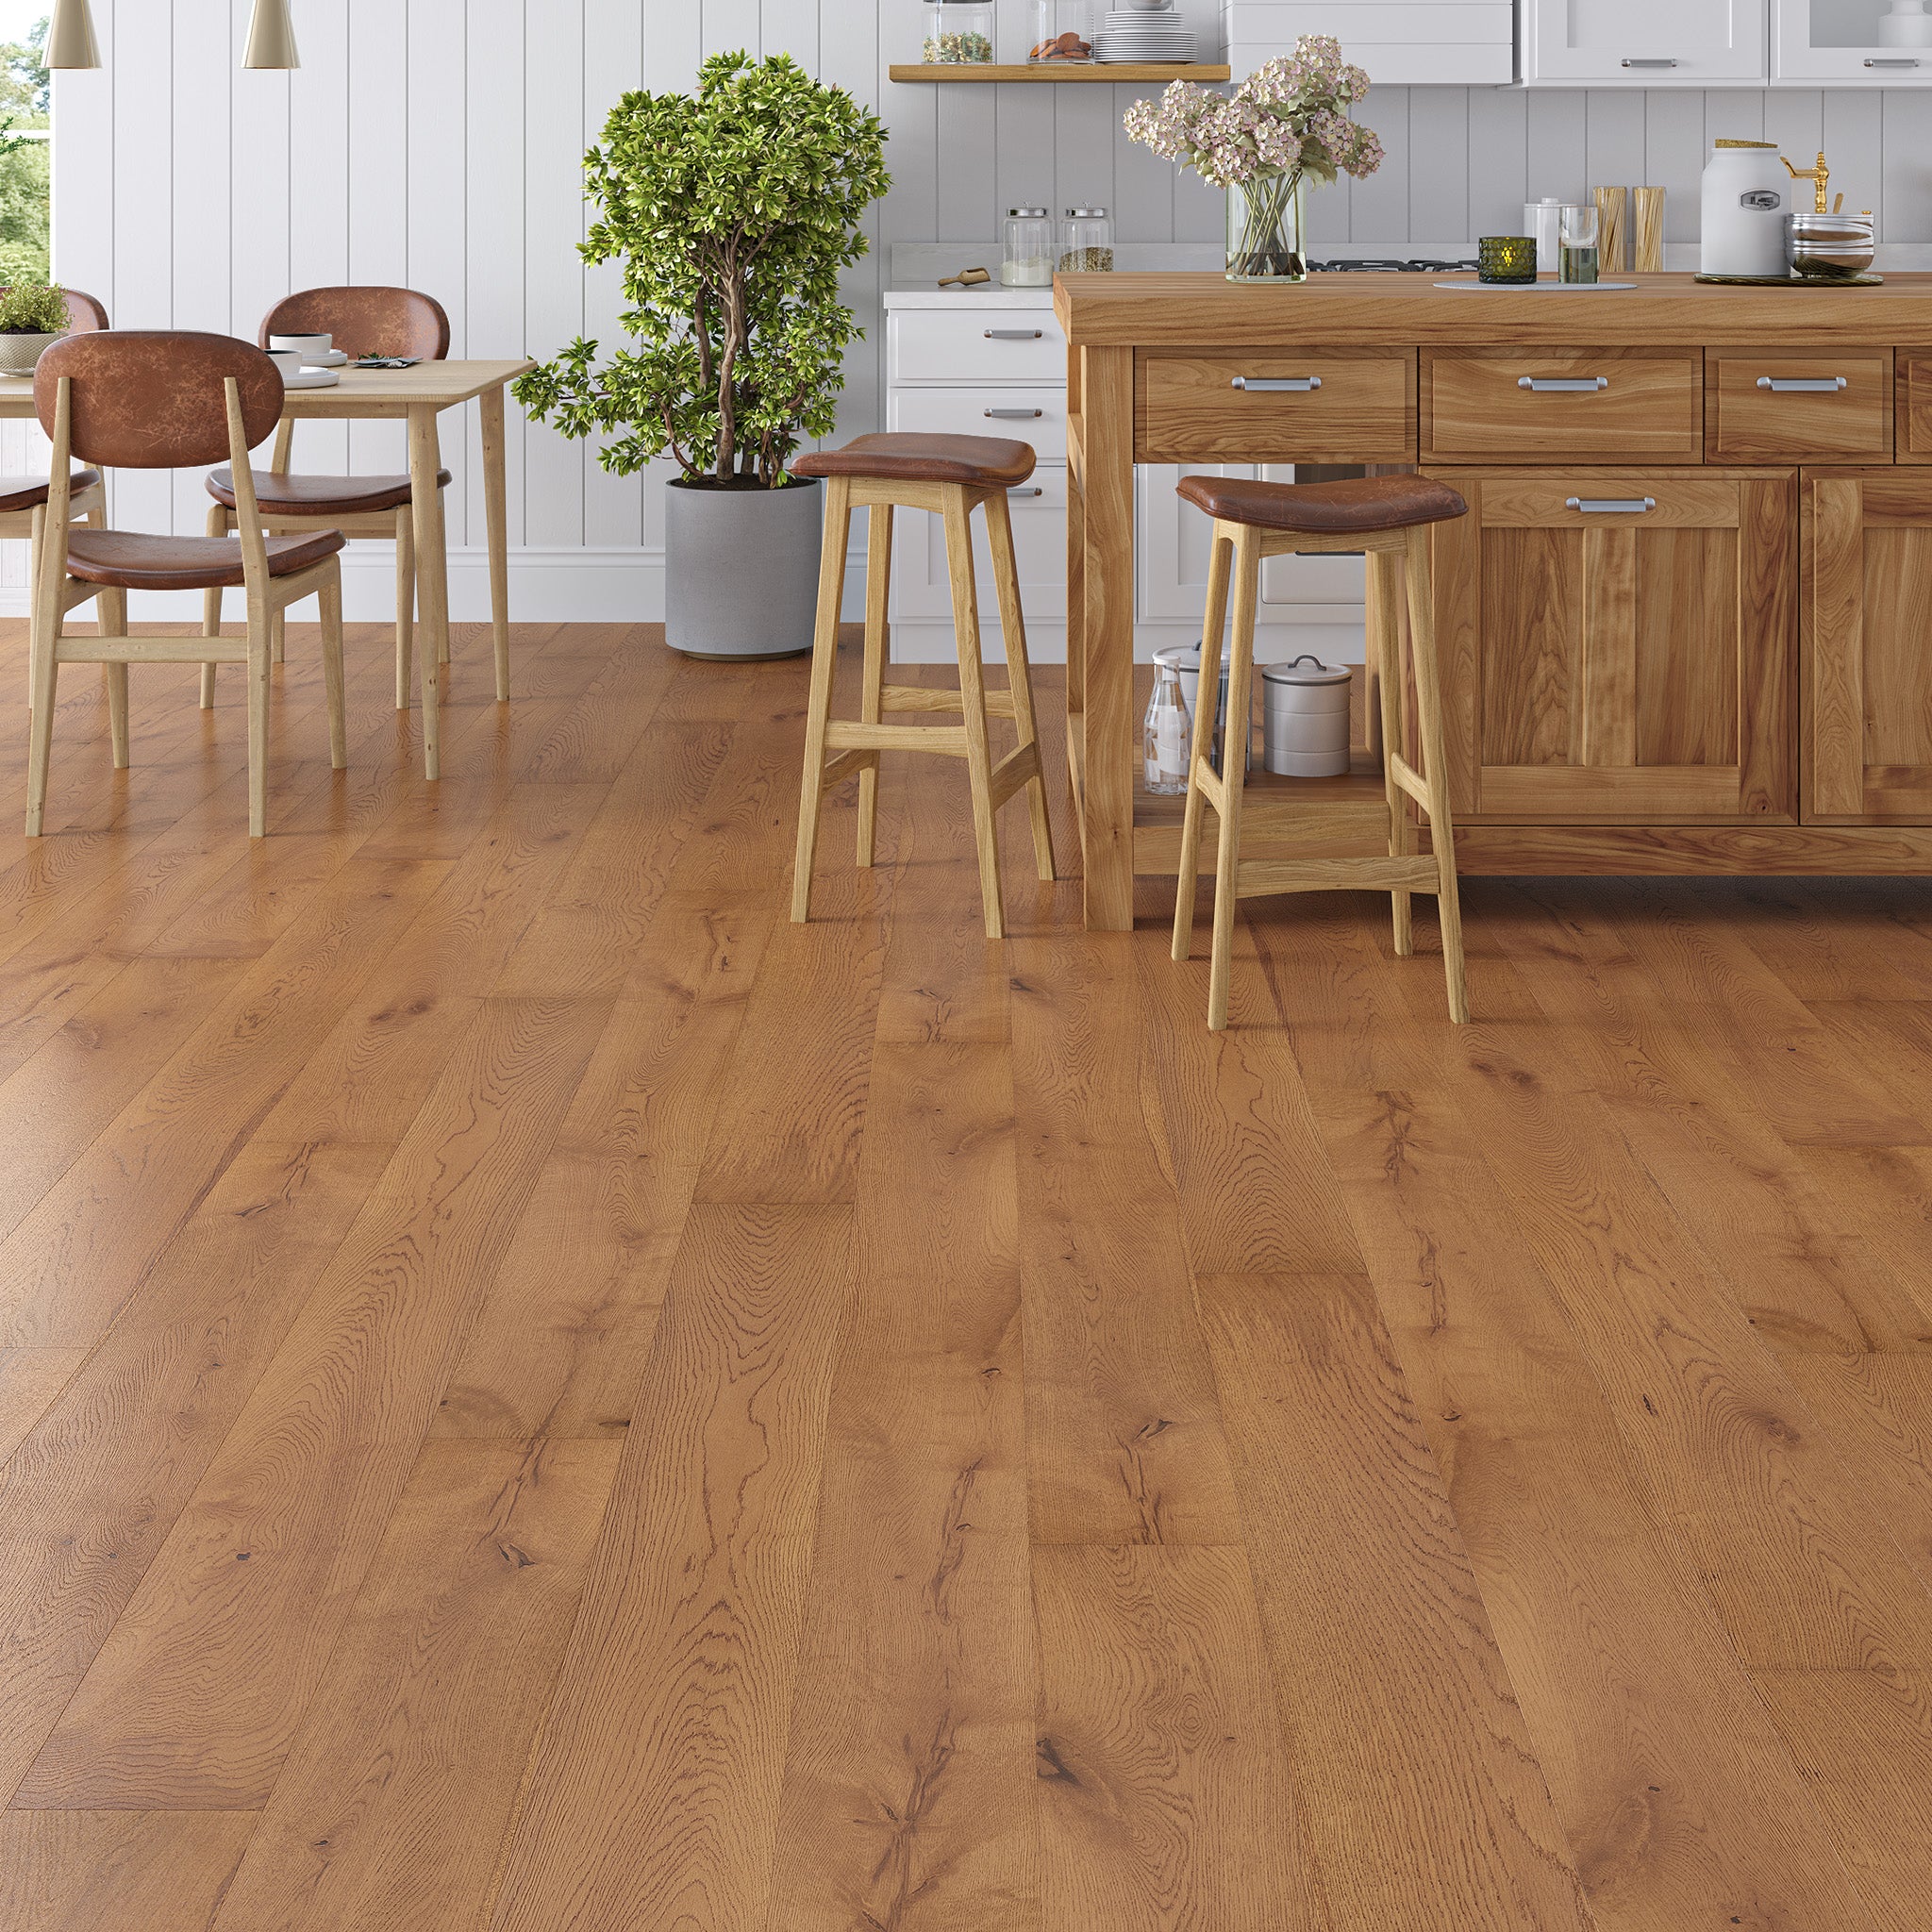 Zinnia Oak Golden Brushed & Lacquered 20/6 x 190mm Straight Engineered